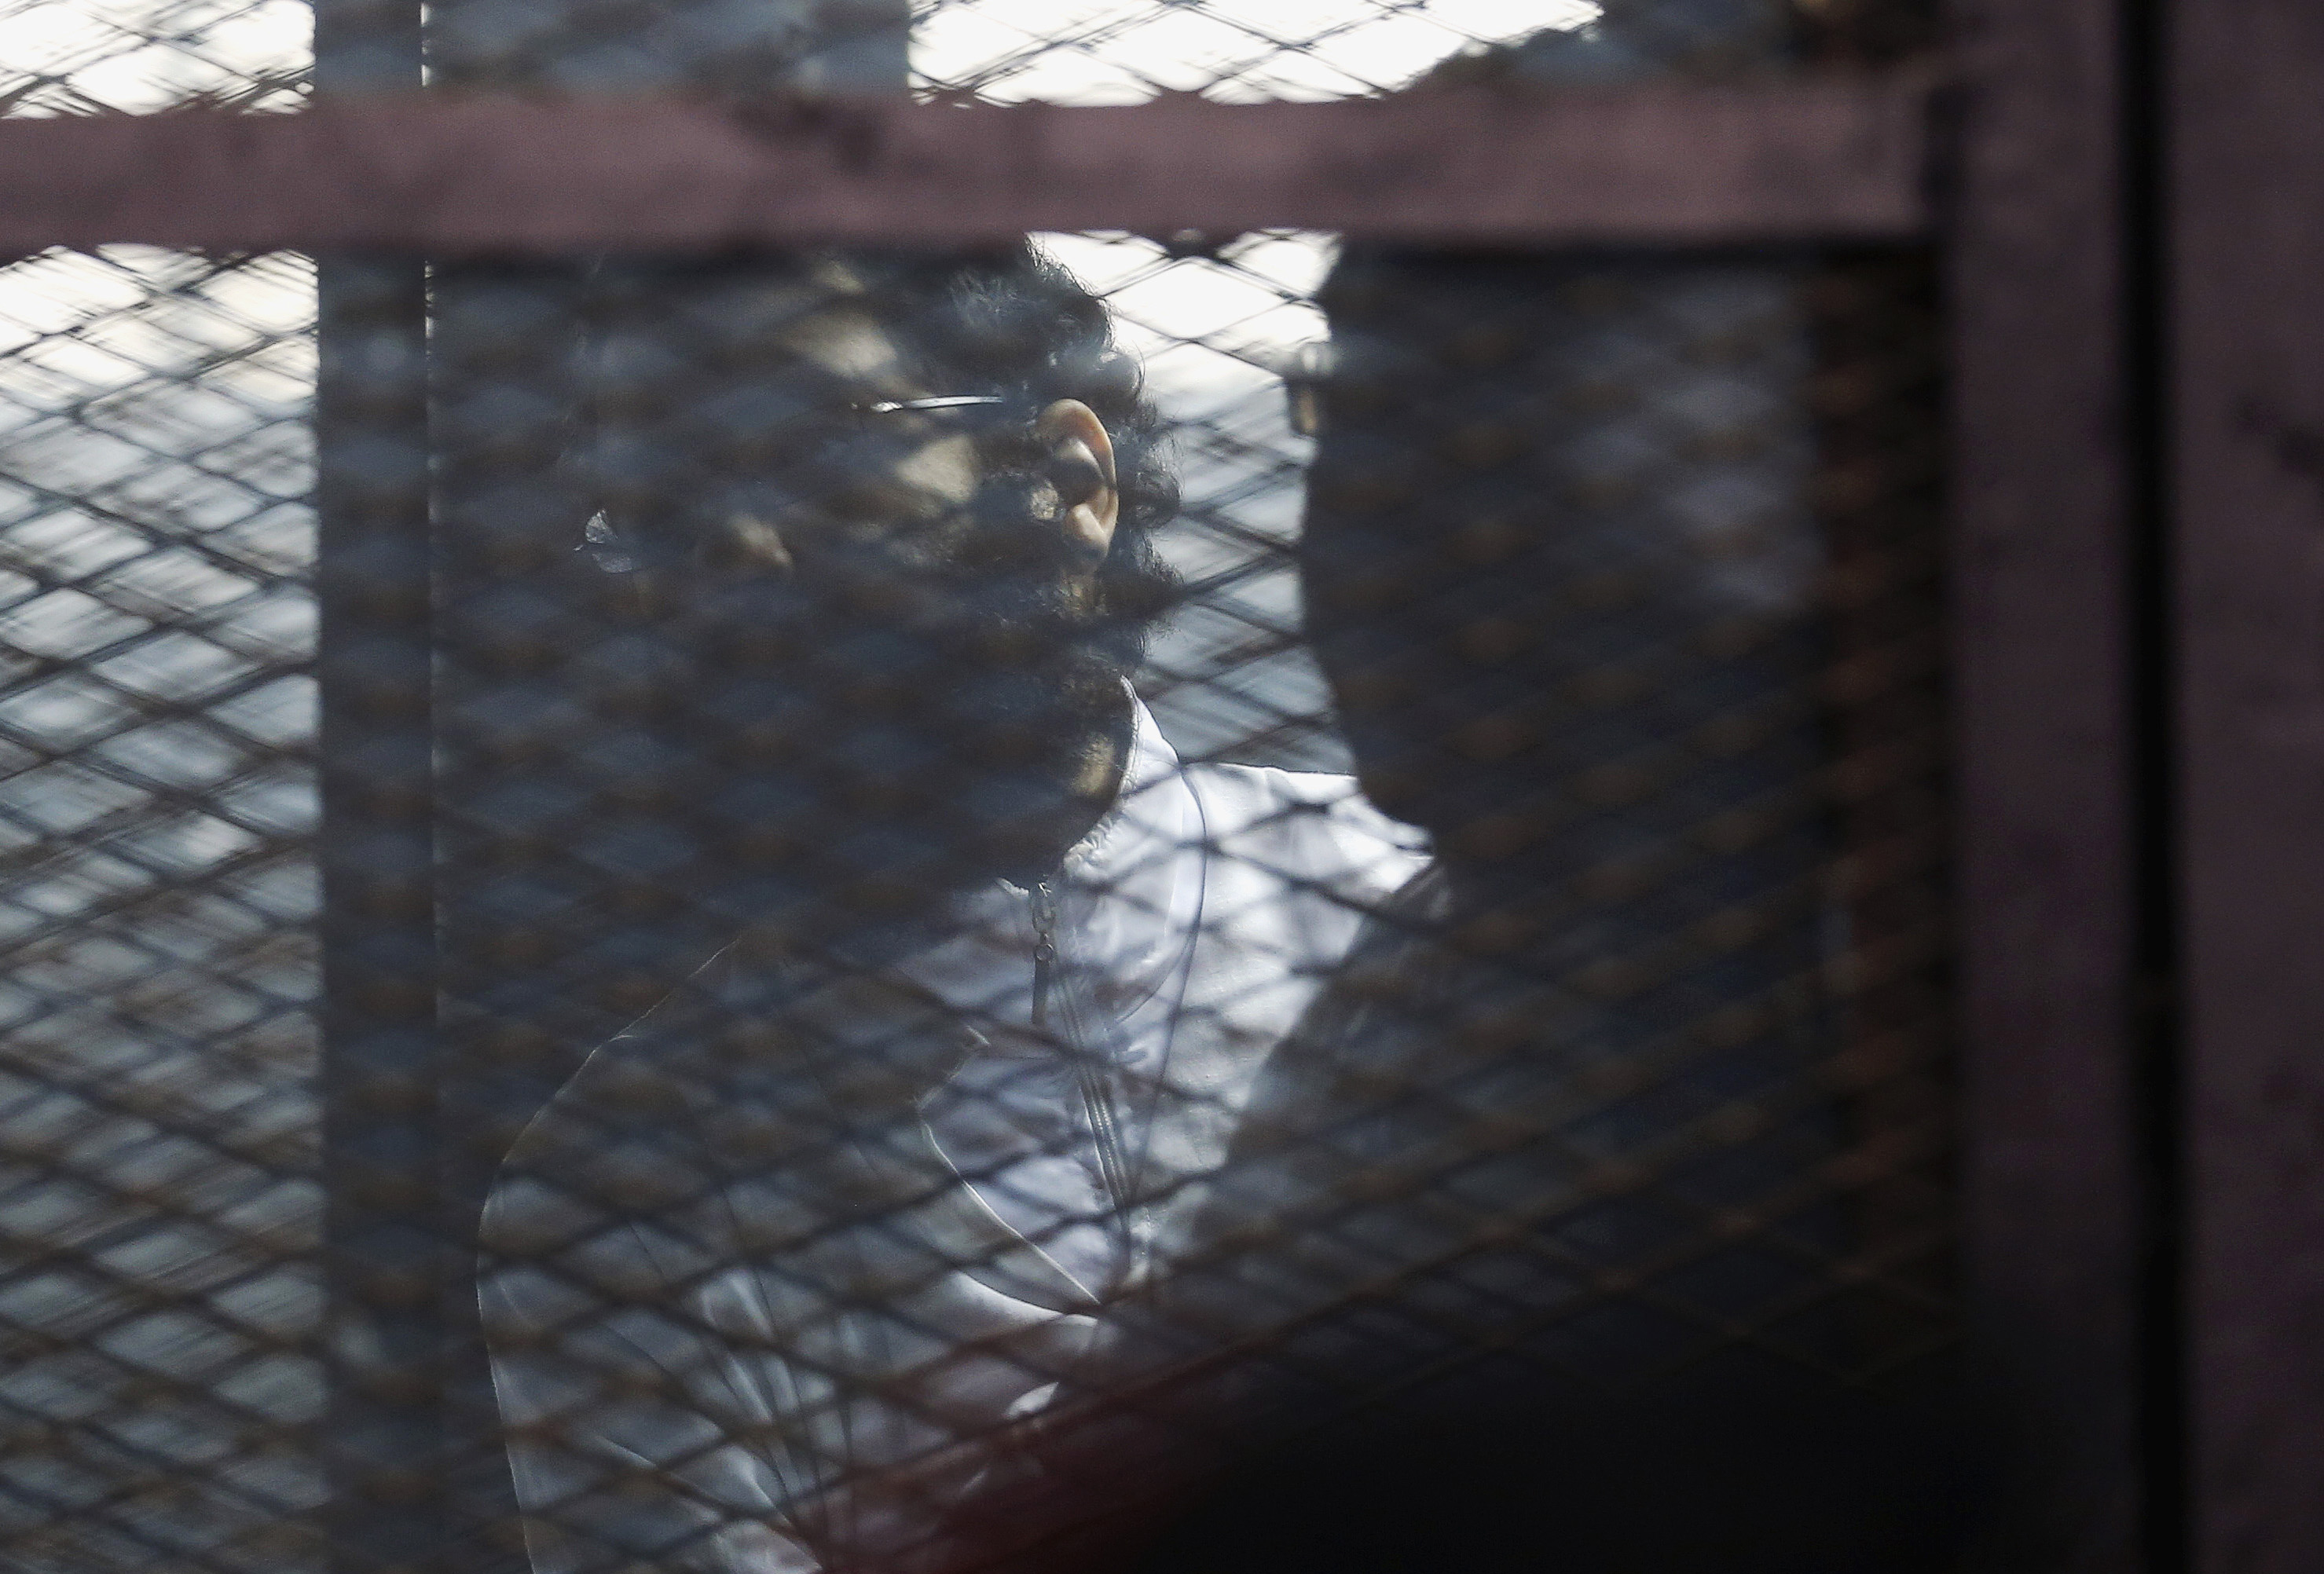 Activist Alaa Abdel Fattah stands behind bars before his verdict is announced at a court in Cairo